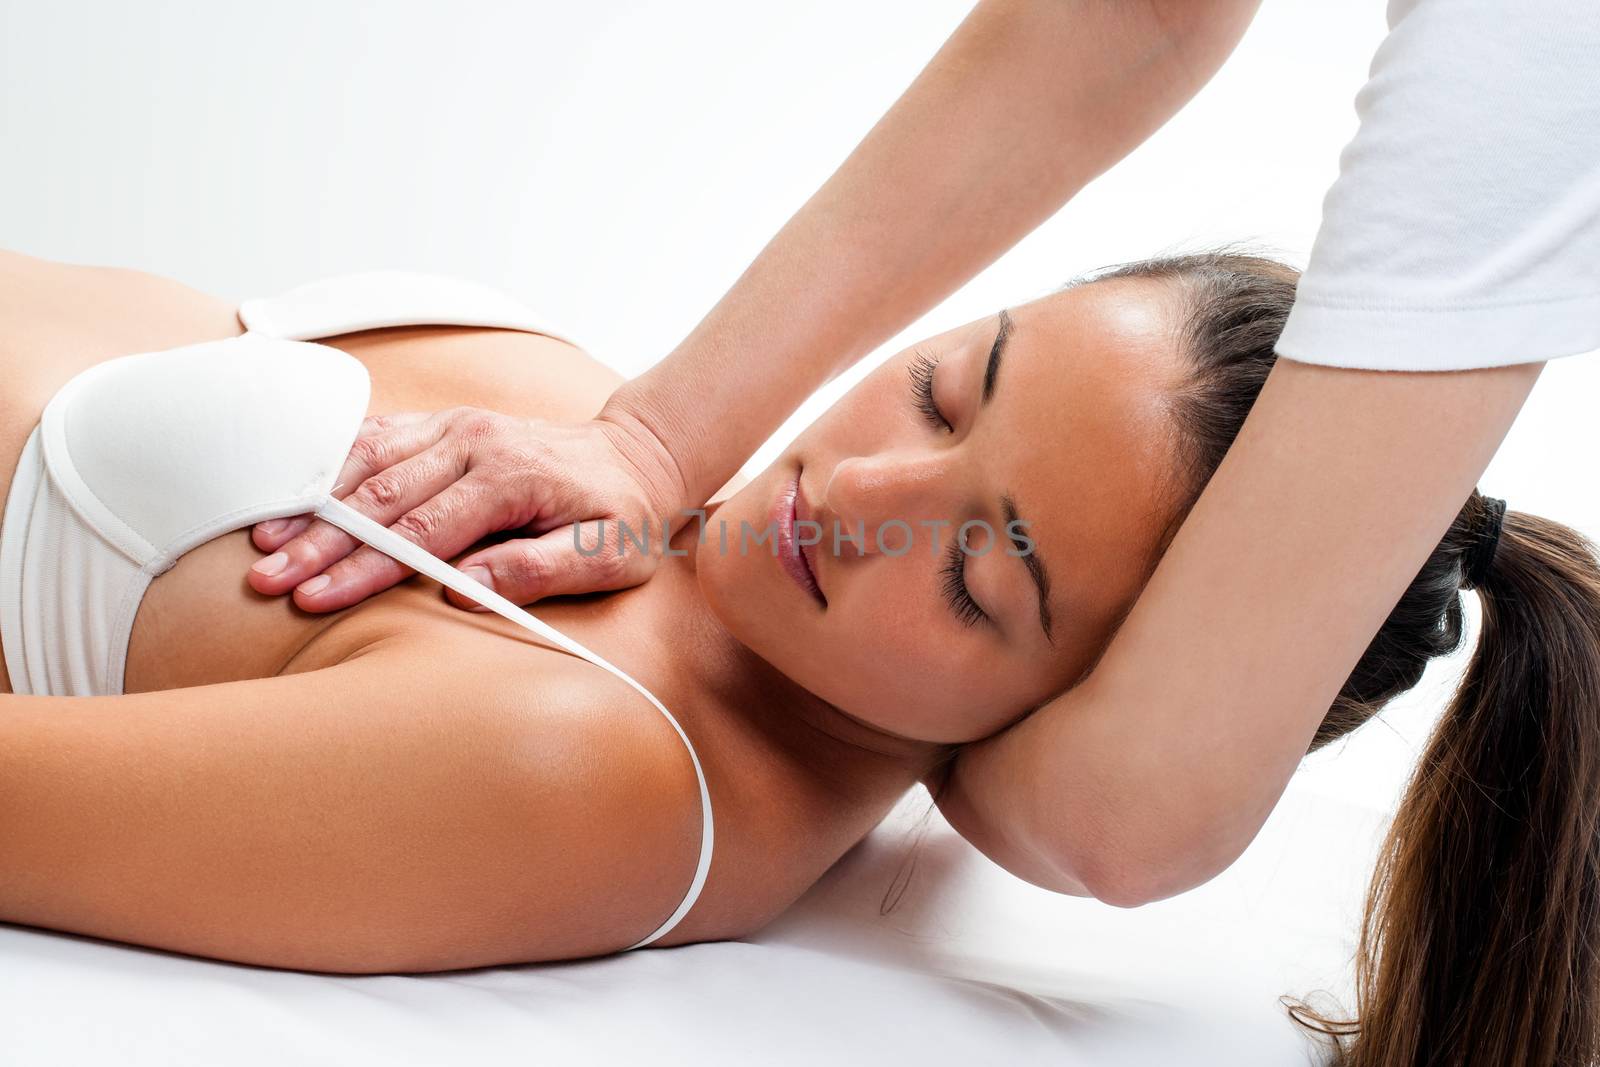 Close up of woman having osteopathic neck massage. Therapist’s hands doing manipulative treatment on neck and chest.